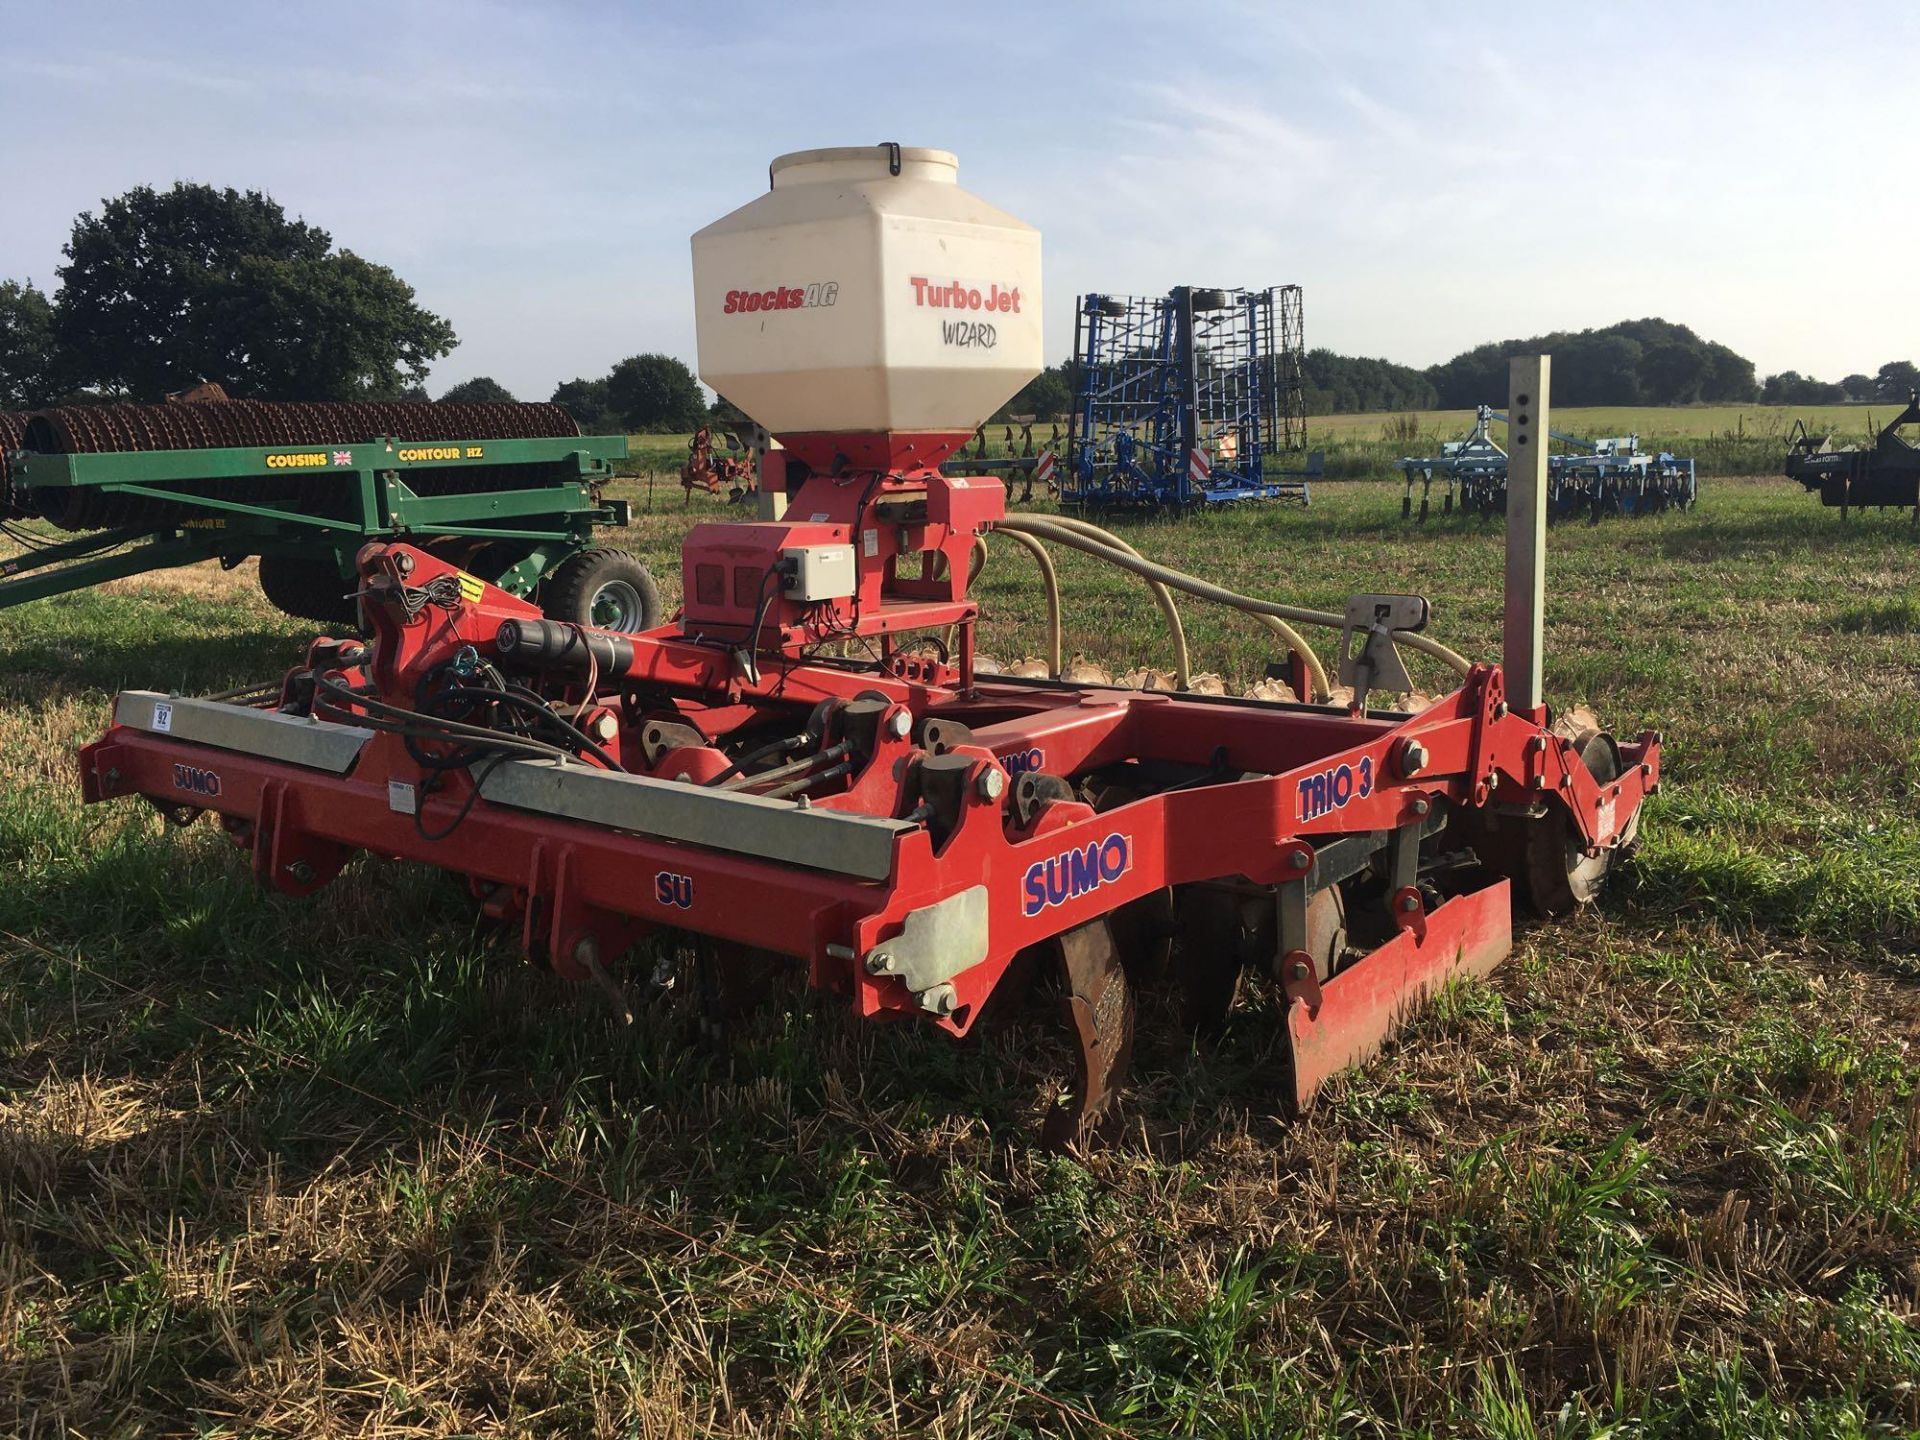 2012 Sumo Trio 3 3m cultivator with 6 legs, 2 rows of discs and multi packer, with auto reset. - Image 3 of 16